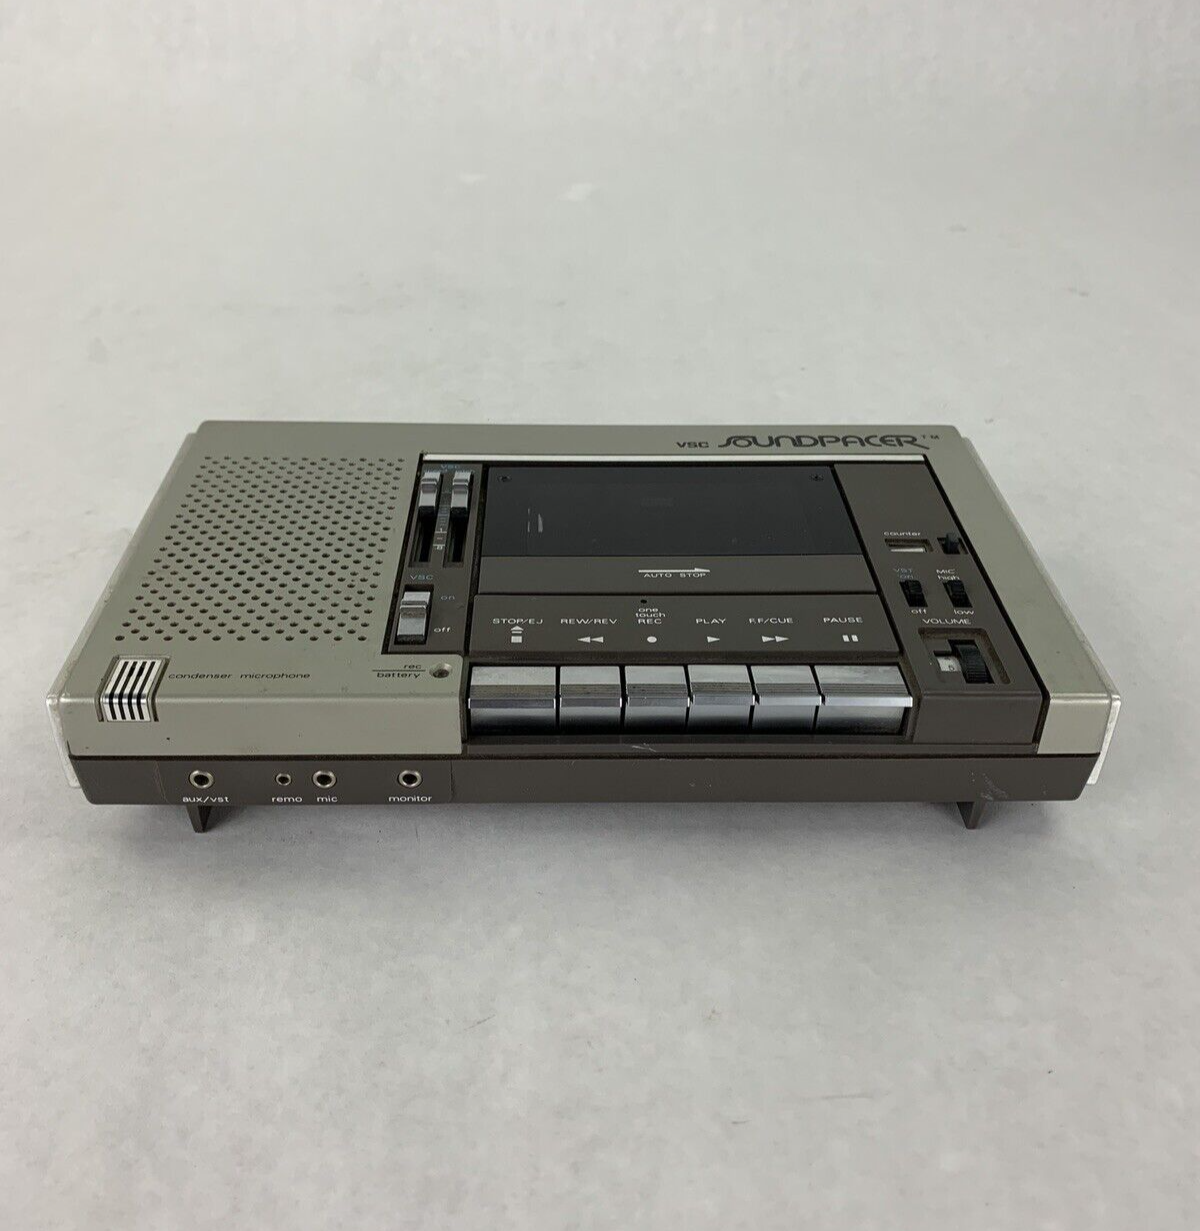 Vintage VSC Soundpacer Tape Recorder and Player VSC C-4 for Parts and Repair